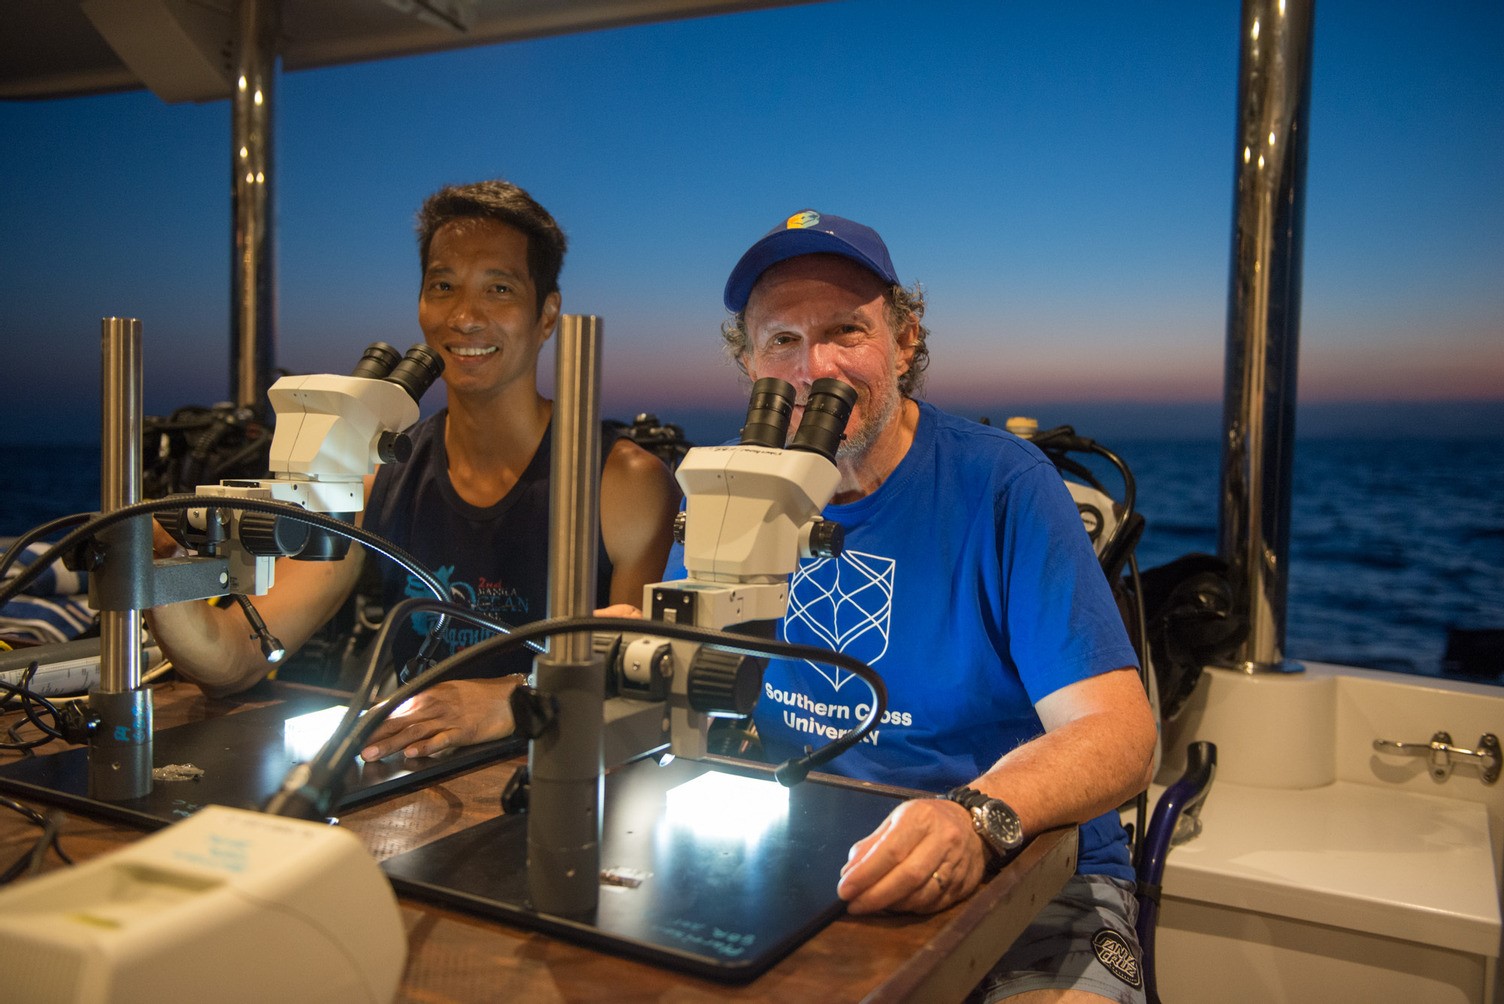 Two men sitting behind microscopes smiling with ocean in the background